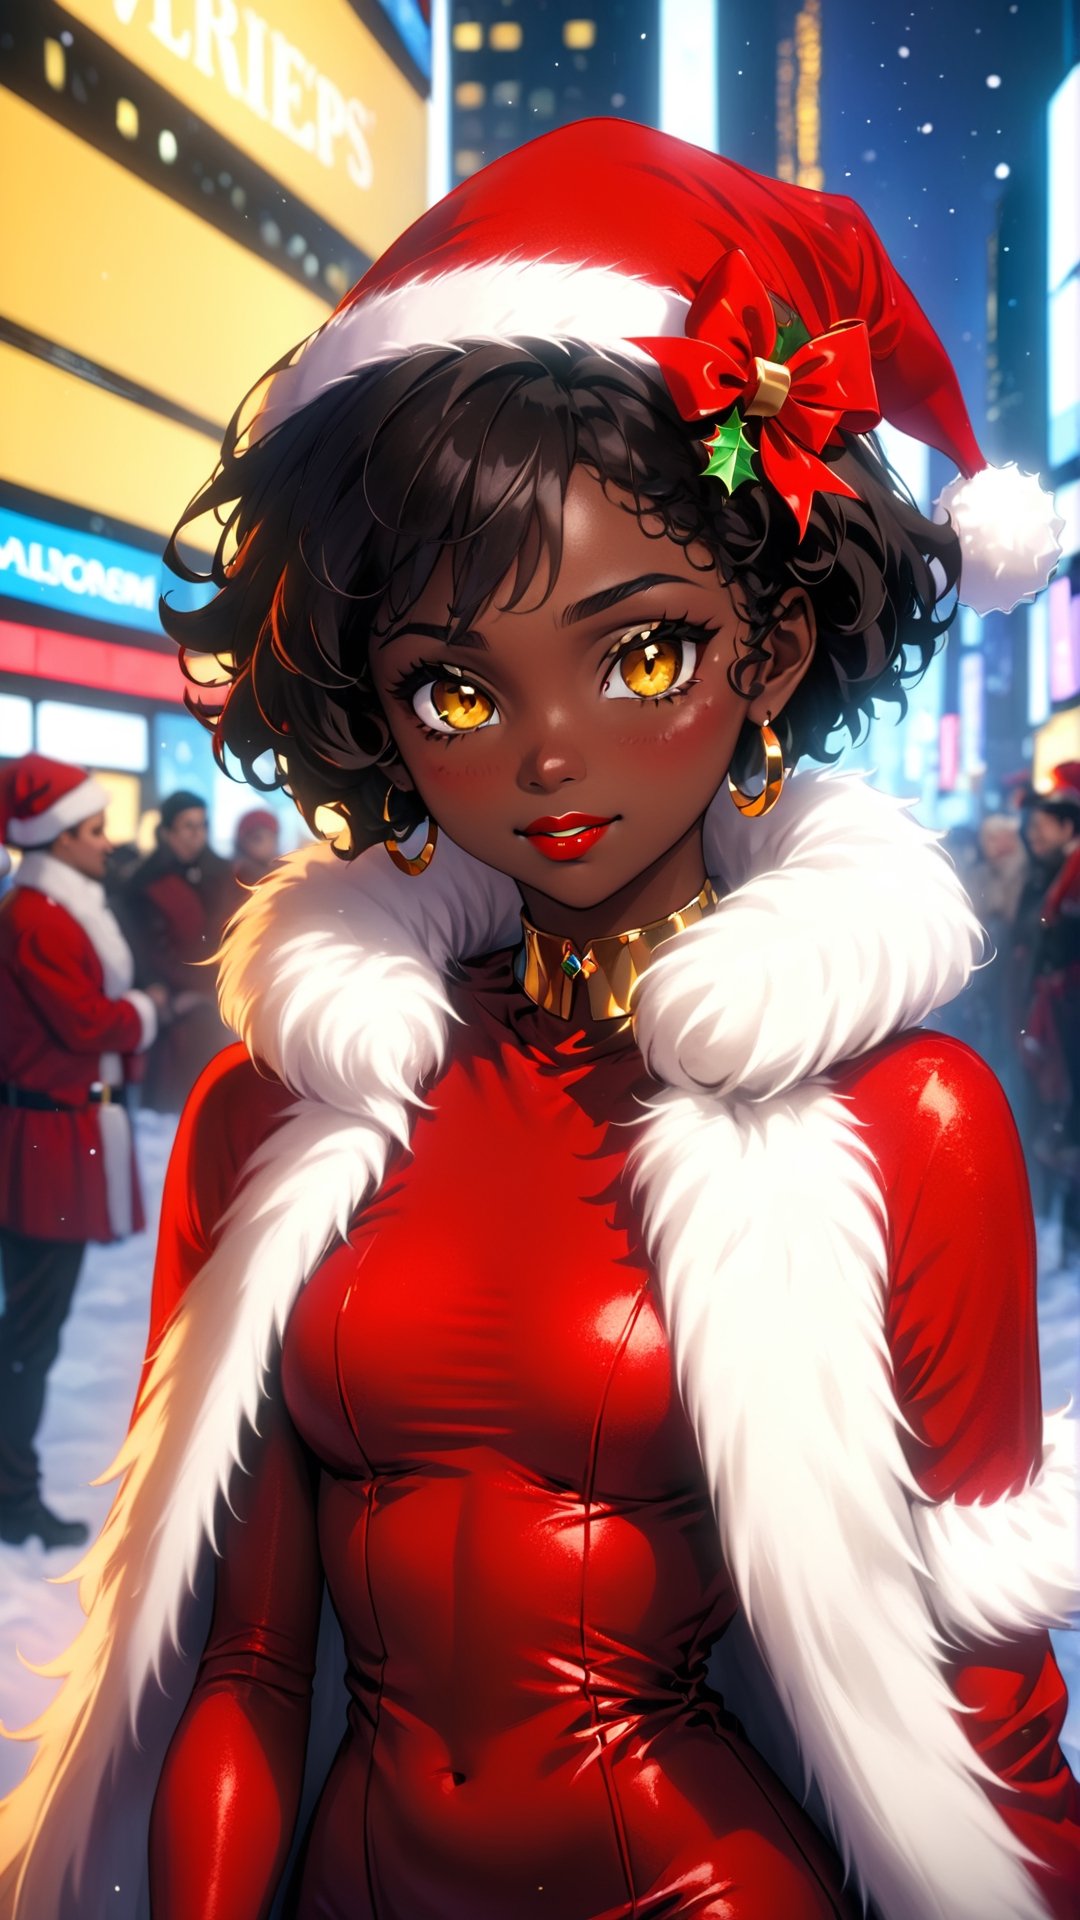 anitoon style, solo, dark skin, 1girl, yellow eyes, jewelry, black hair, short hair, dark-skinned female, makeup, lipstick, looking at viewer, curly hair, bare_top_velvet dress, santa costume, ring earing, gold neckless, gold buncles, fluffy fur dress, red dress, sleeveless, highneck, Times Square Garden, Night, Christmas, ,ral-chrcrts,christmas